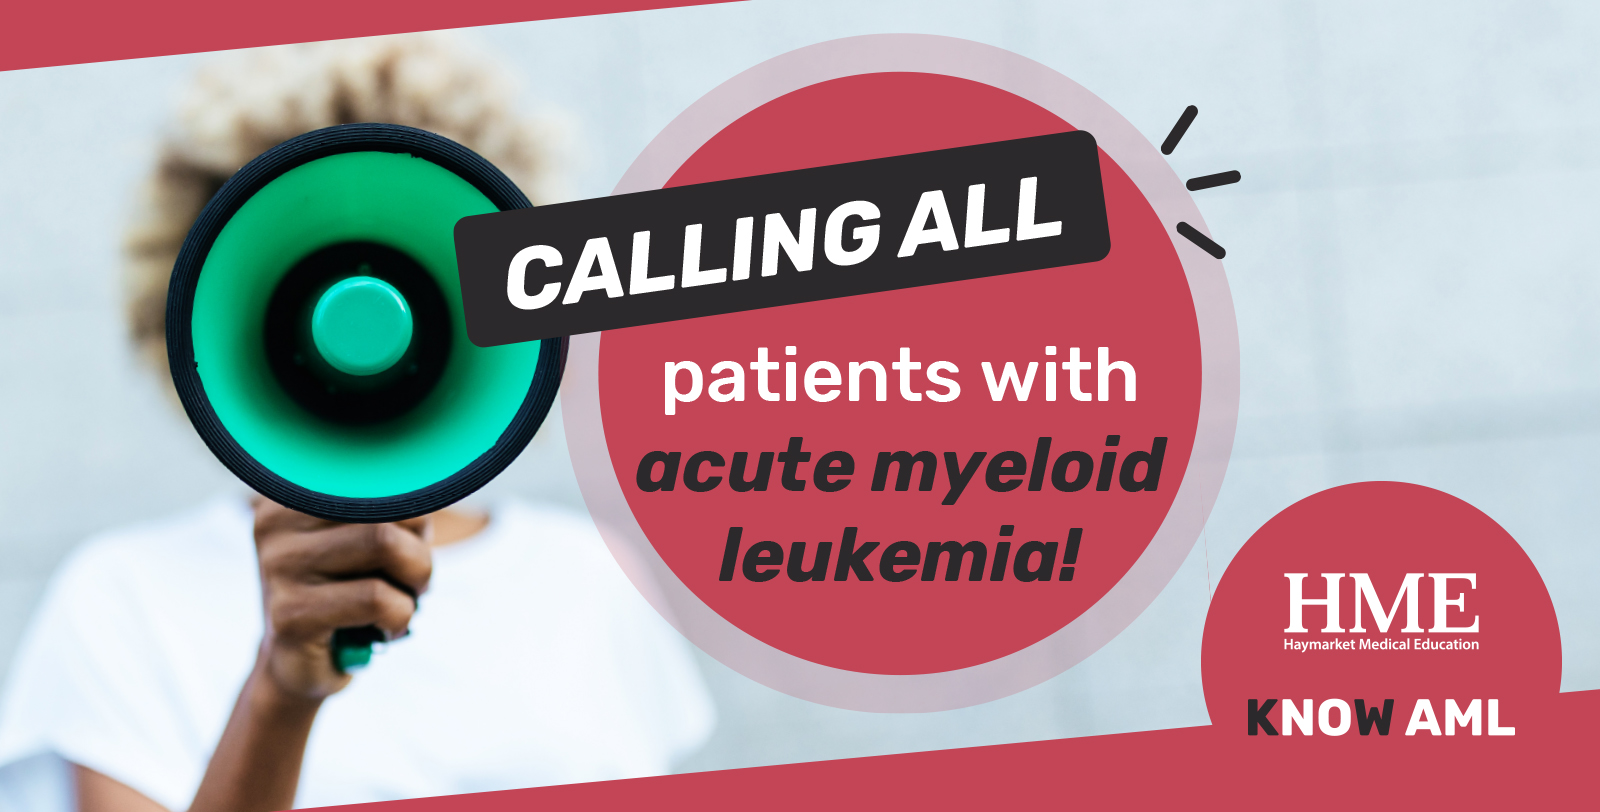 Banner reading 'calling all patients with acute myeloid leukemia'